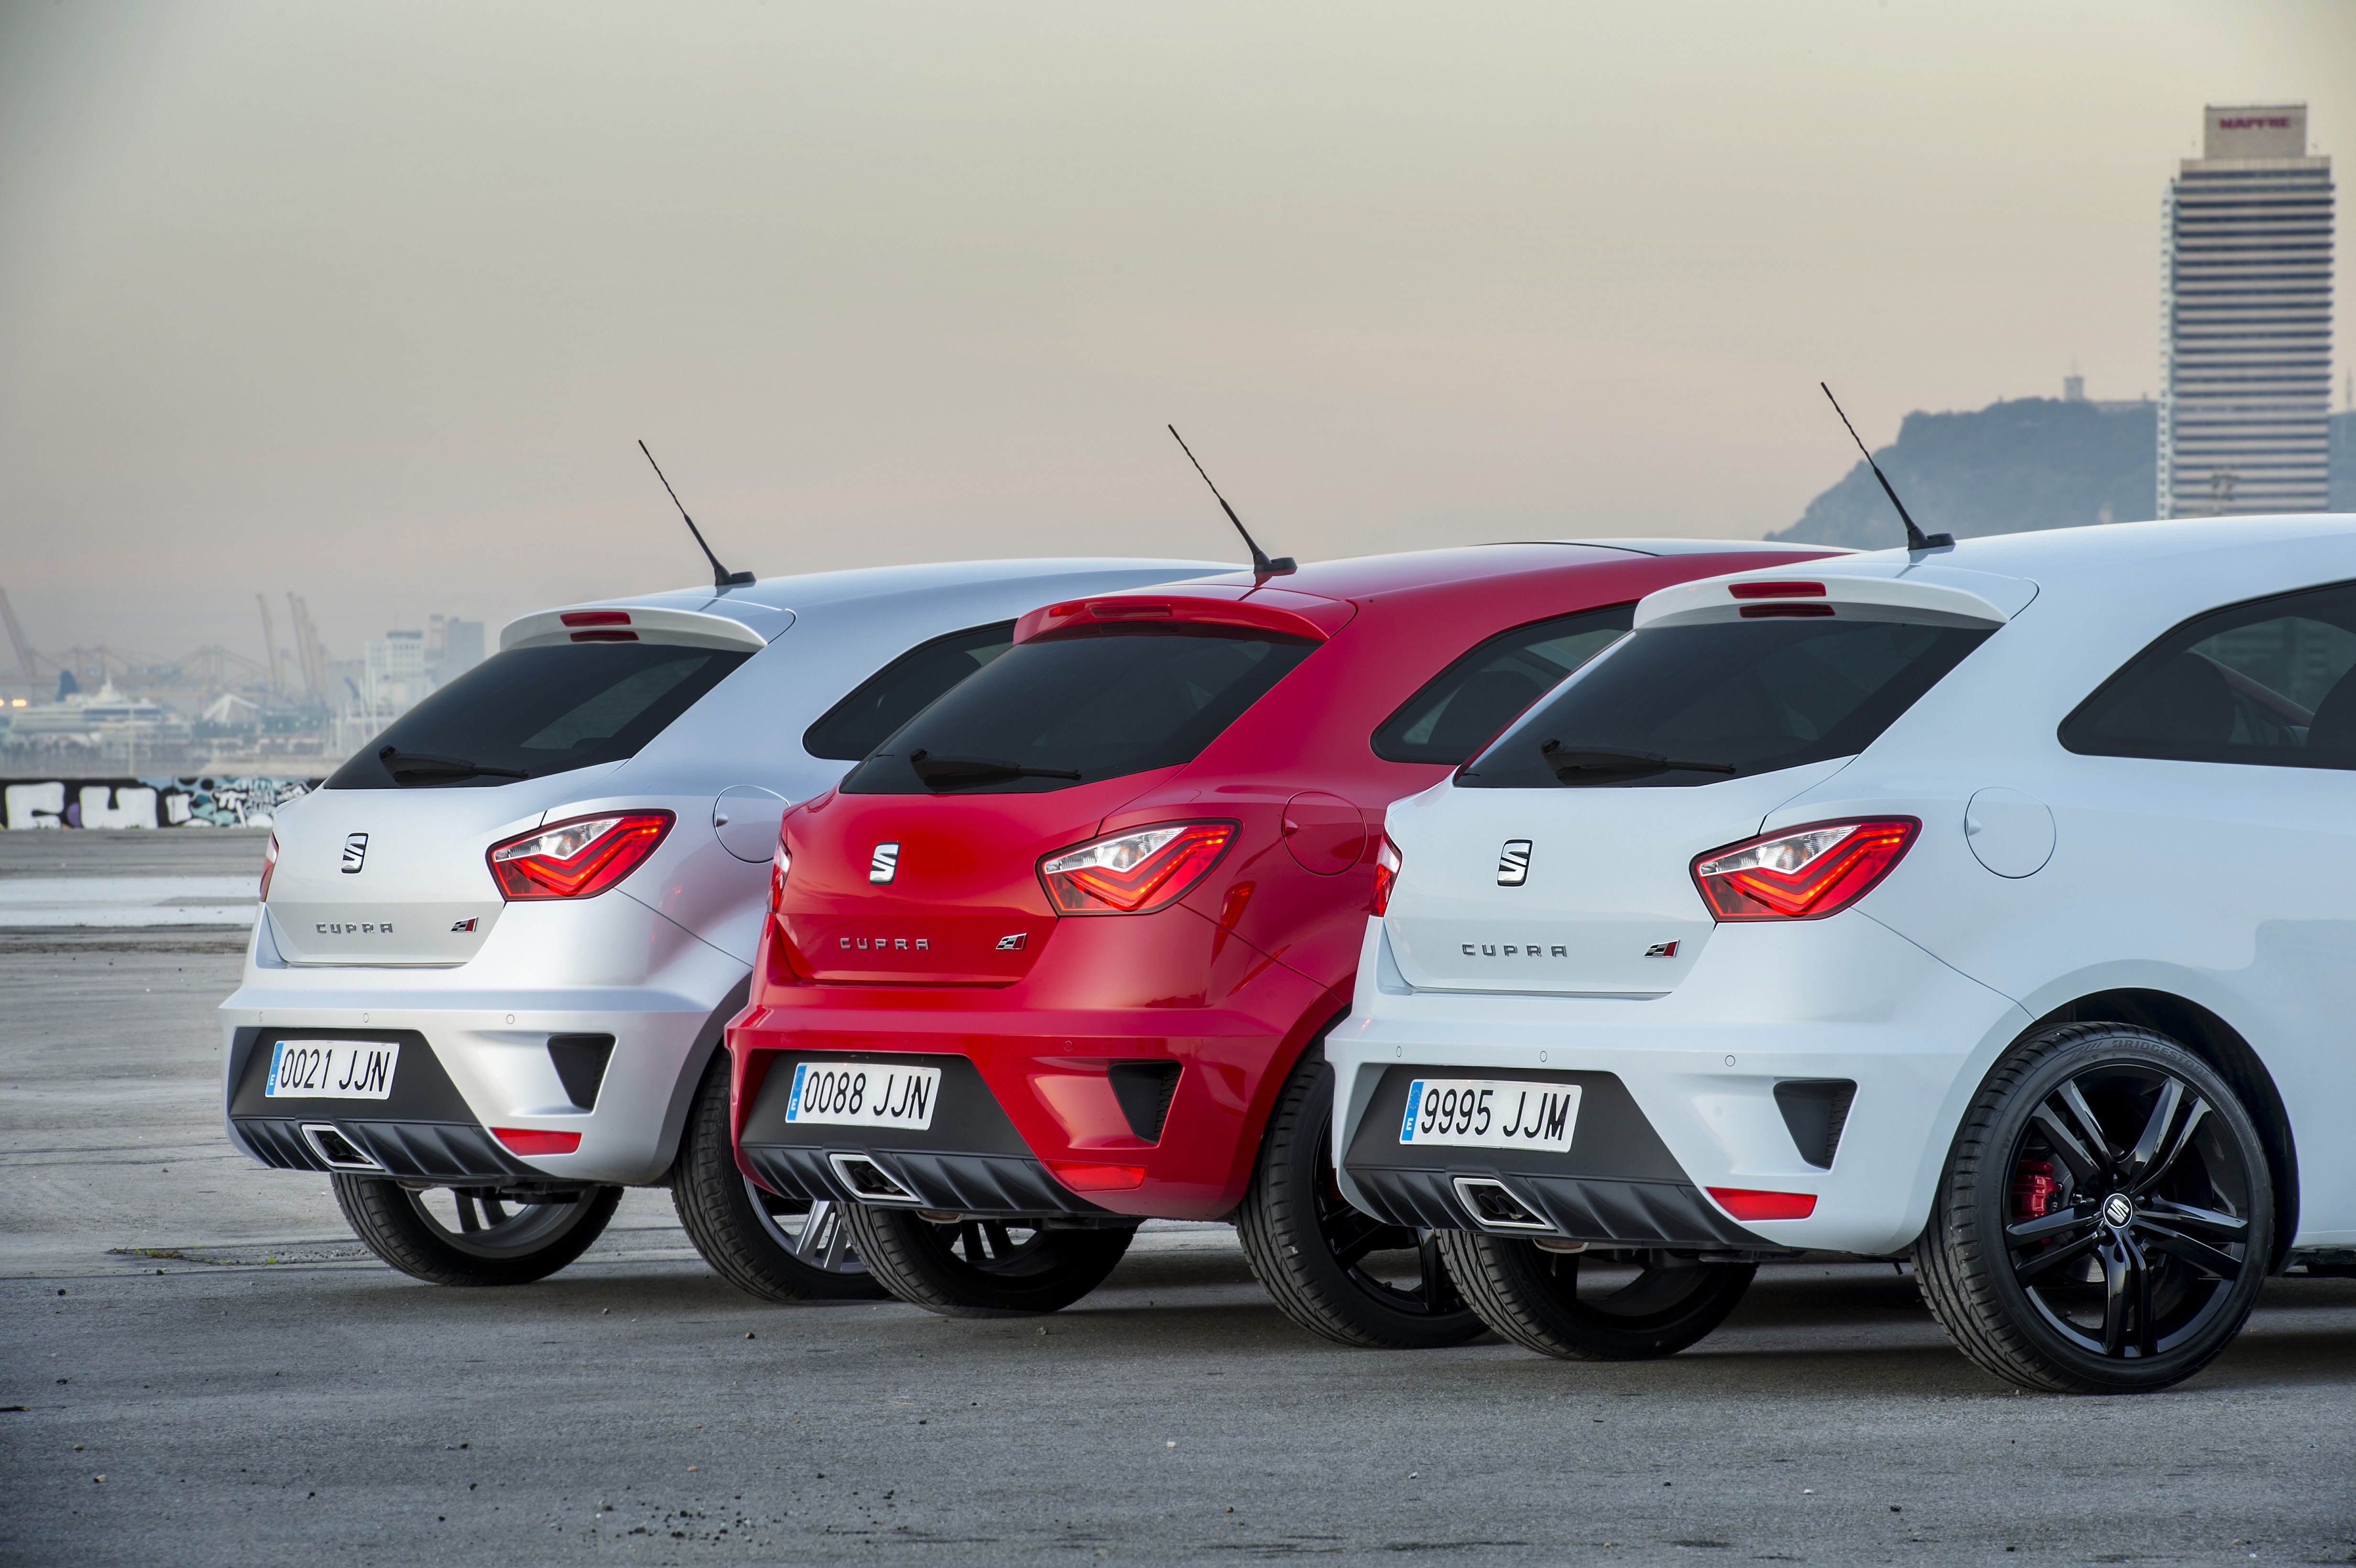 2016-seat-ibiza-cupra-does-100-km-h-in-67s-thanks-to-18l-turbo-engine-with-192-hp_1